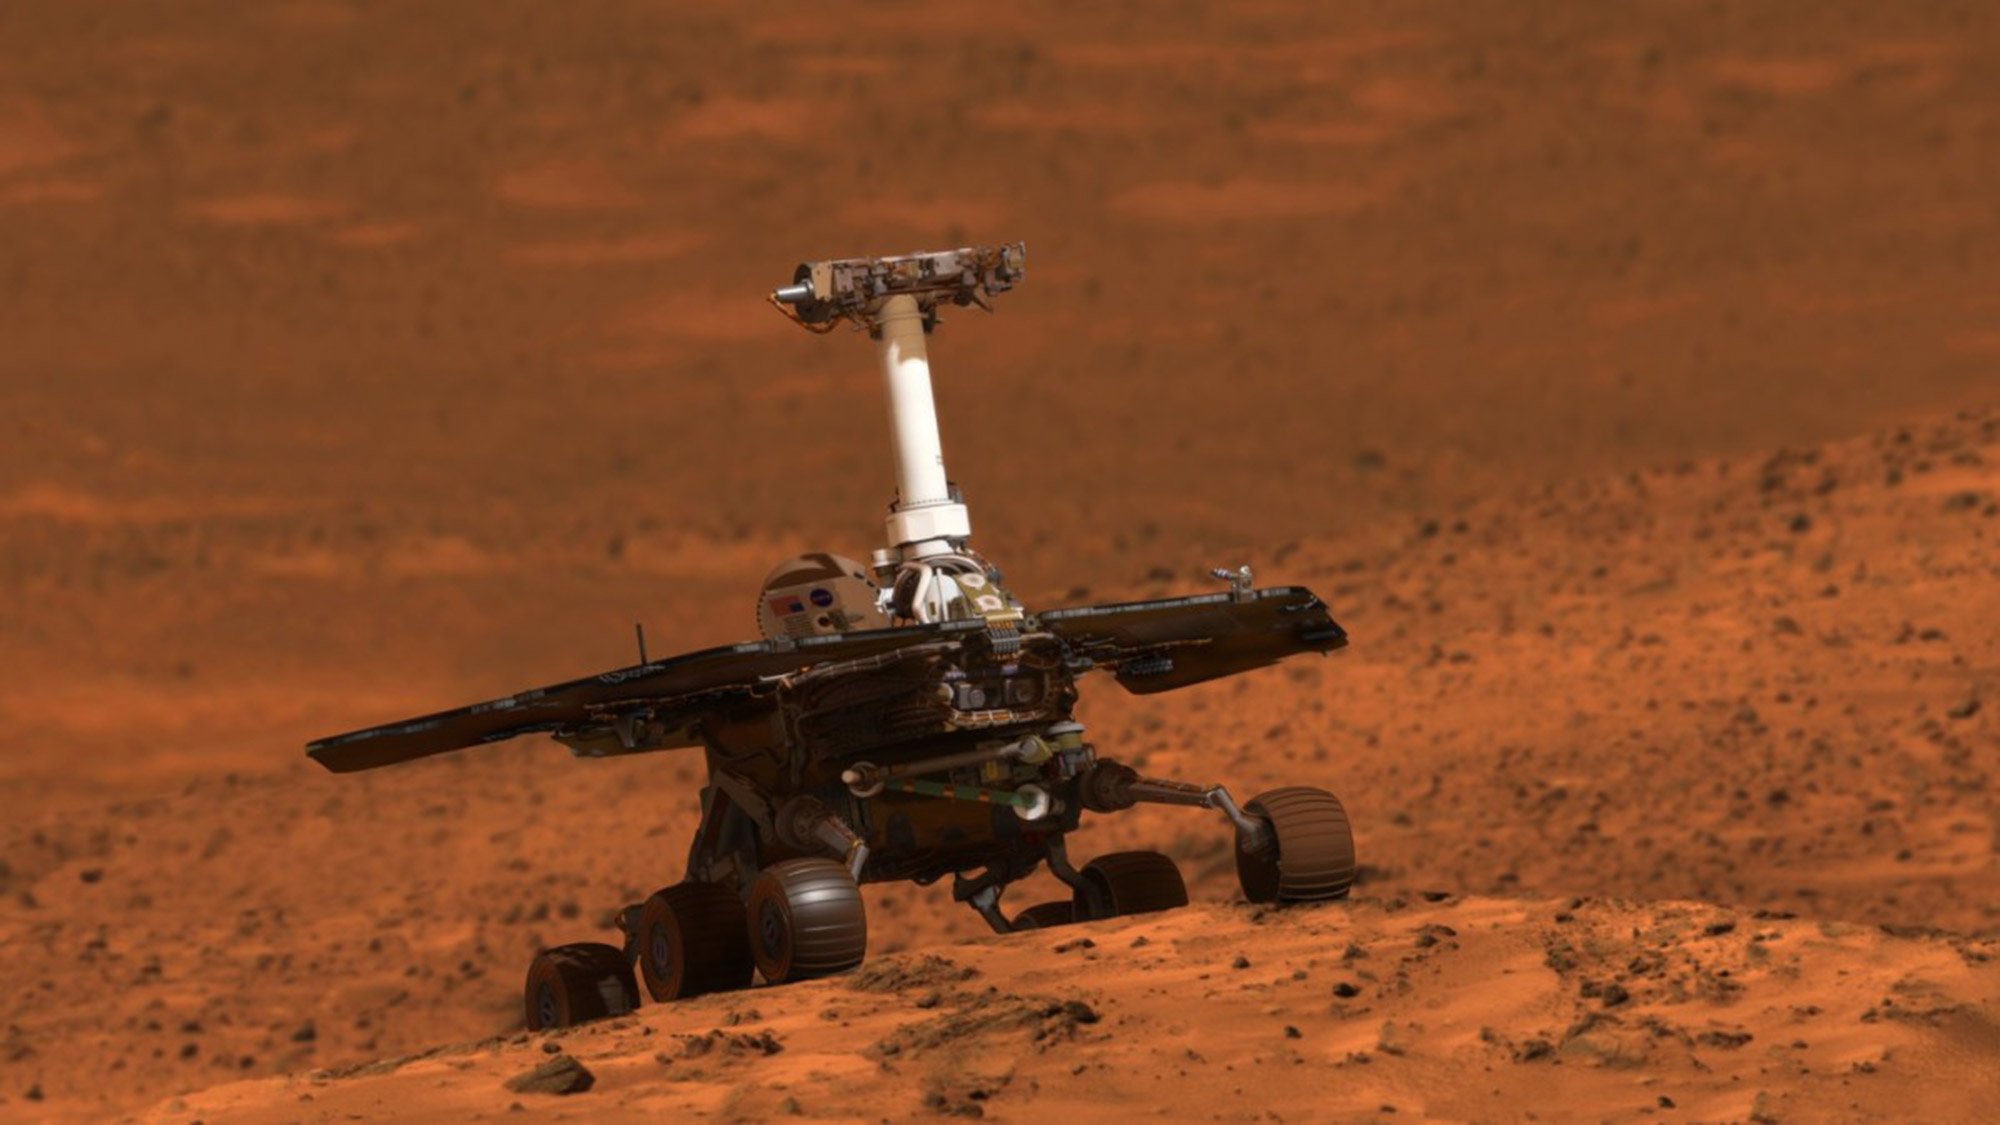 An image of Opportunity on Mars.